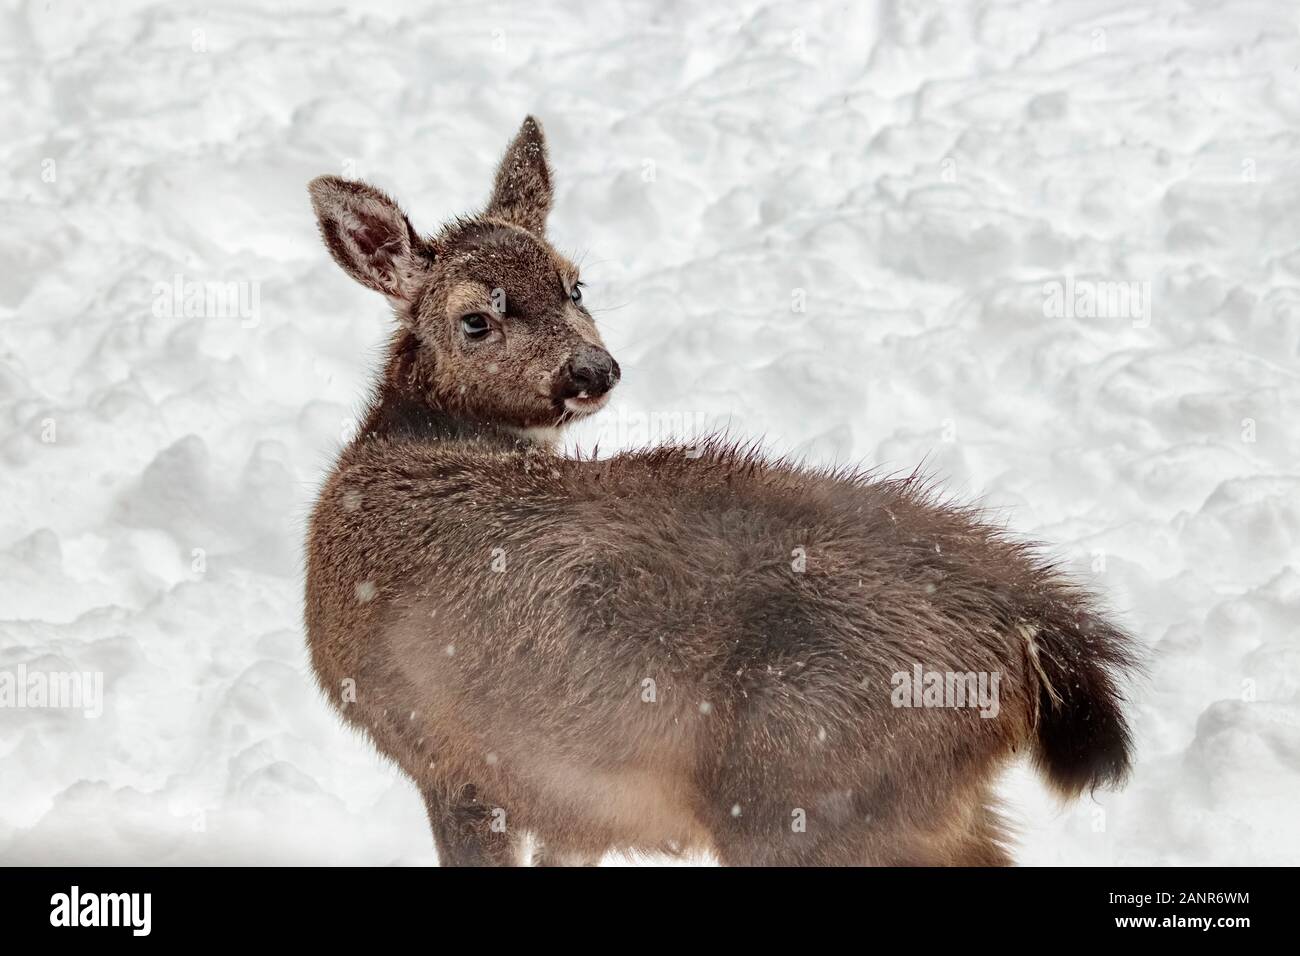 Close-up of a fawn in its first winter, looking dishevelled and confused as it stands alone in the snow, staring over its shoulder at the viewer. Stock Photo